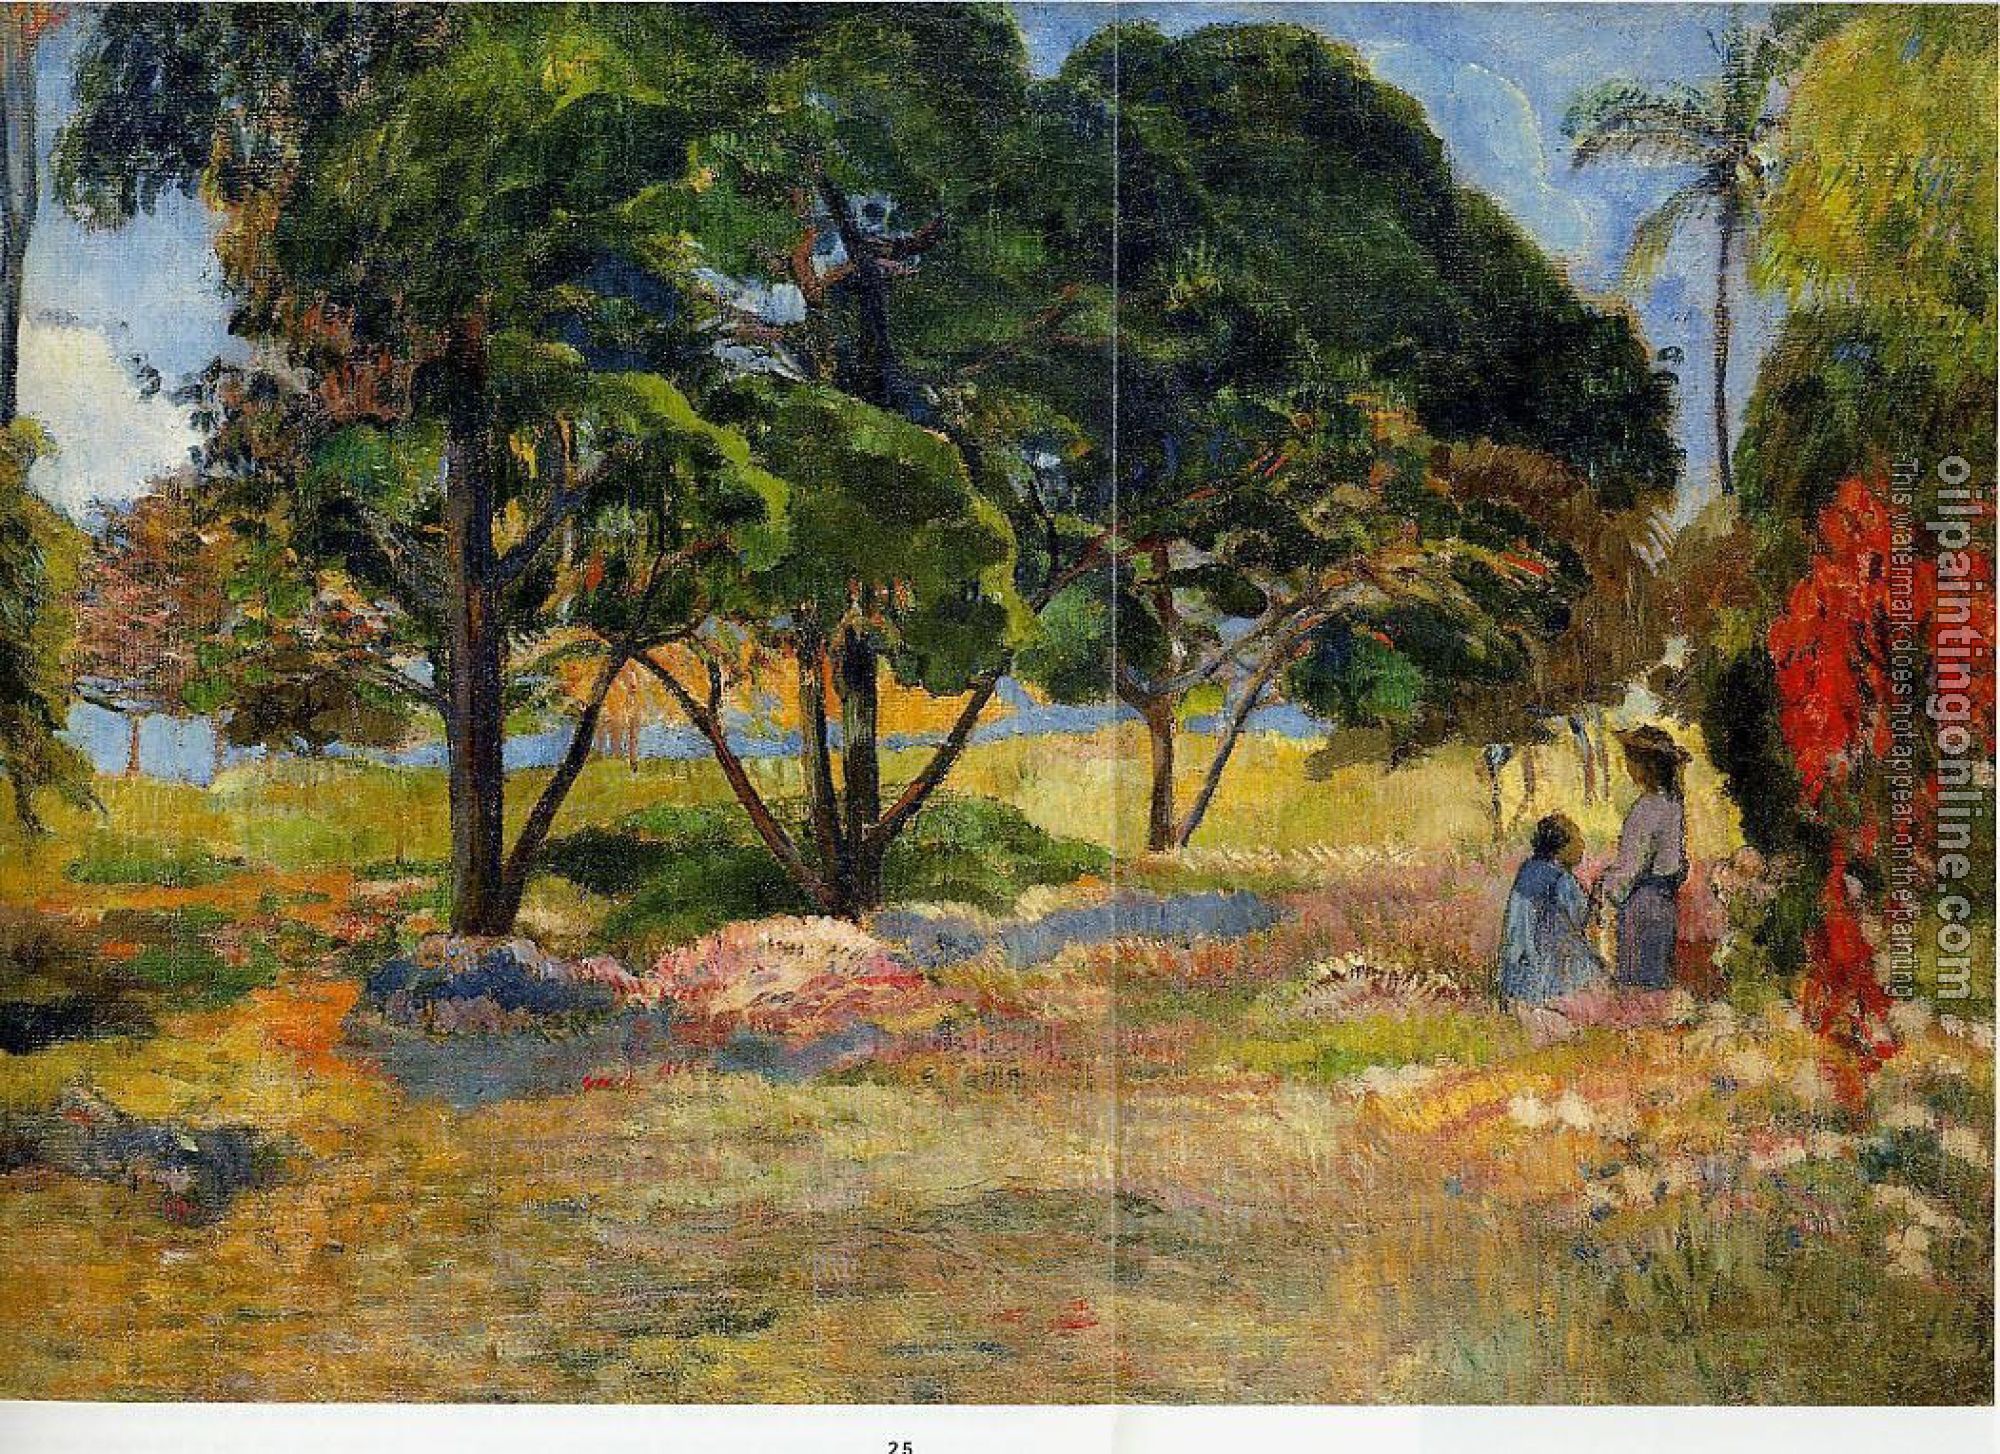 Gauguin, Paul - Landscape with Three Trees